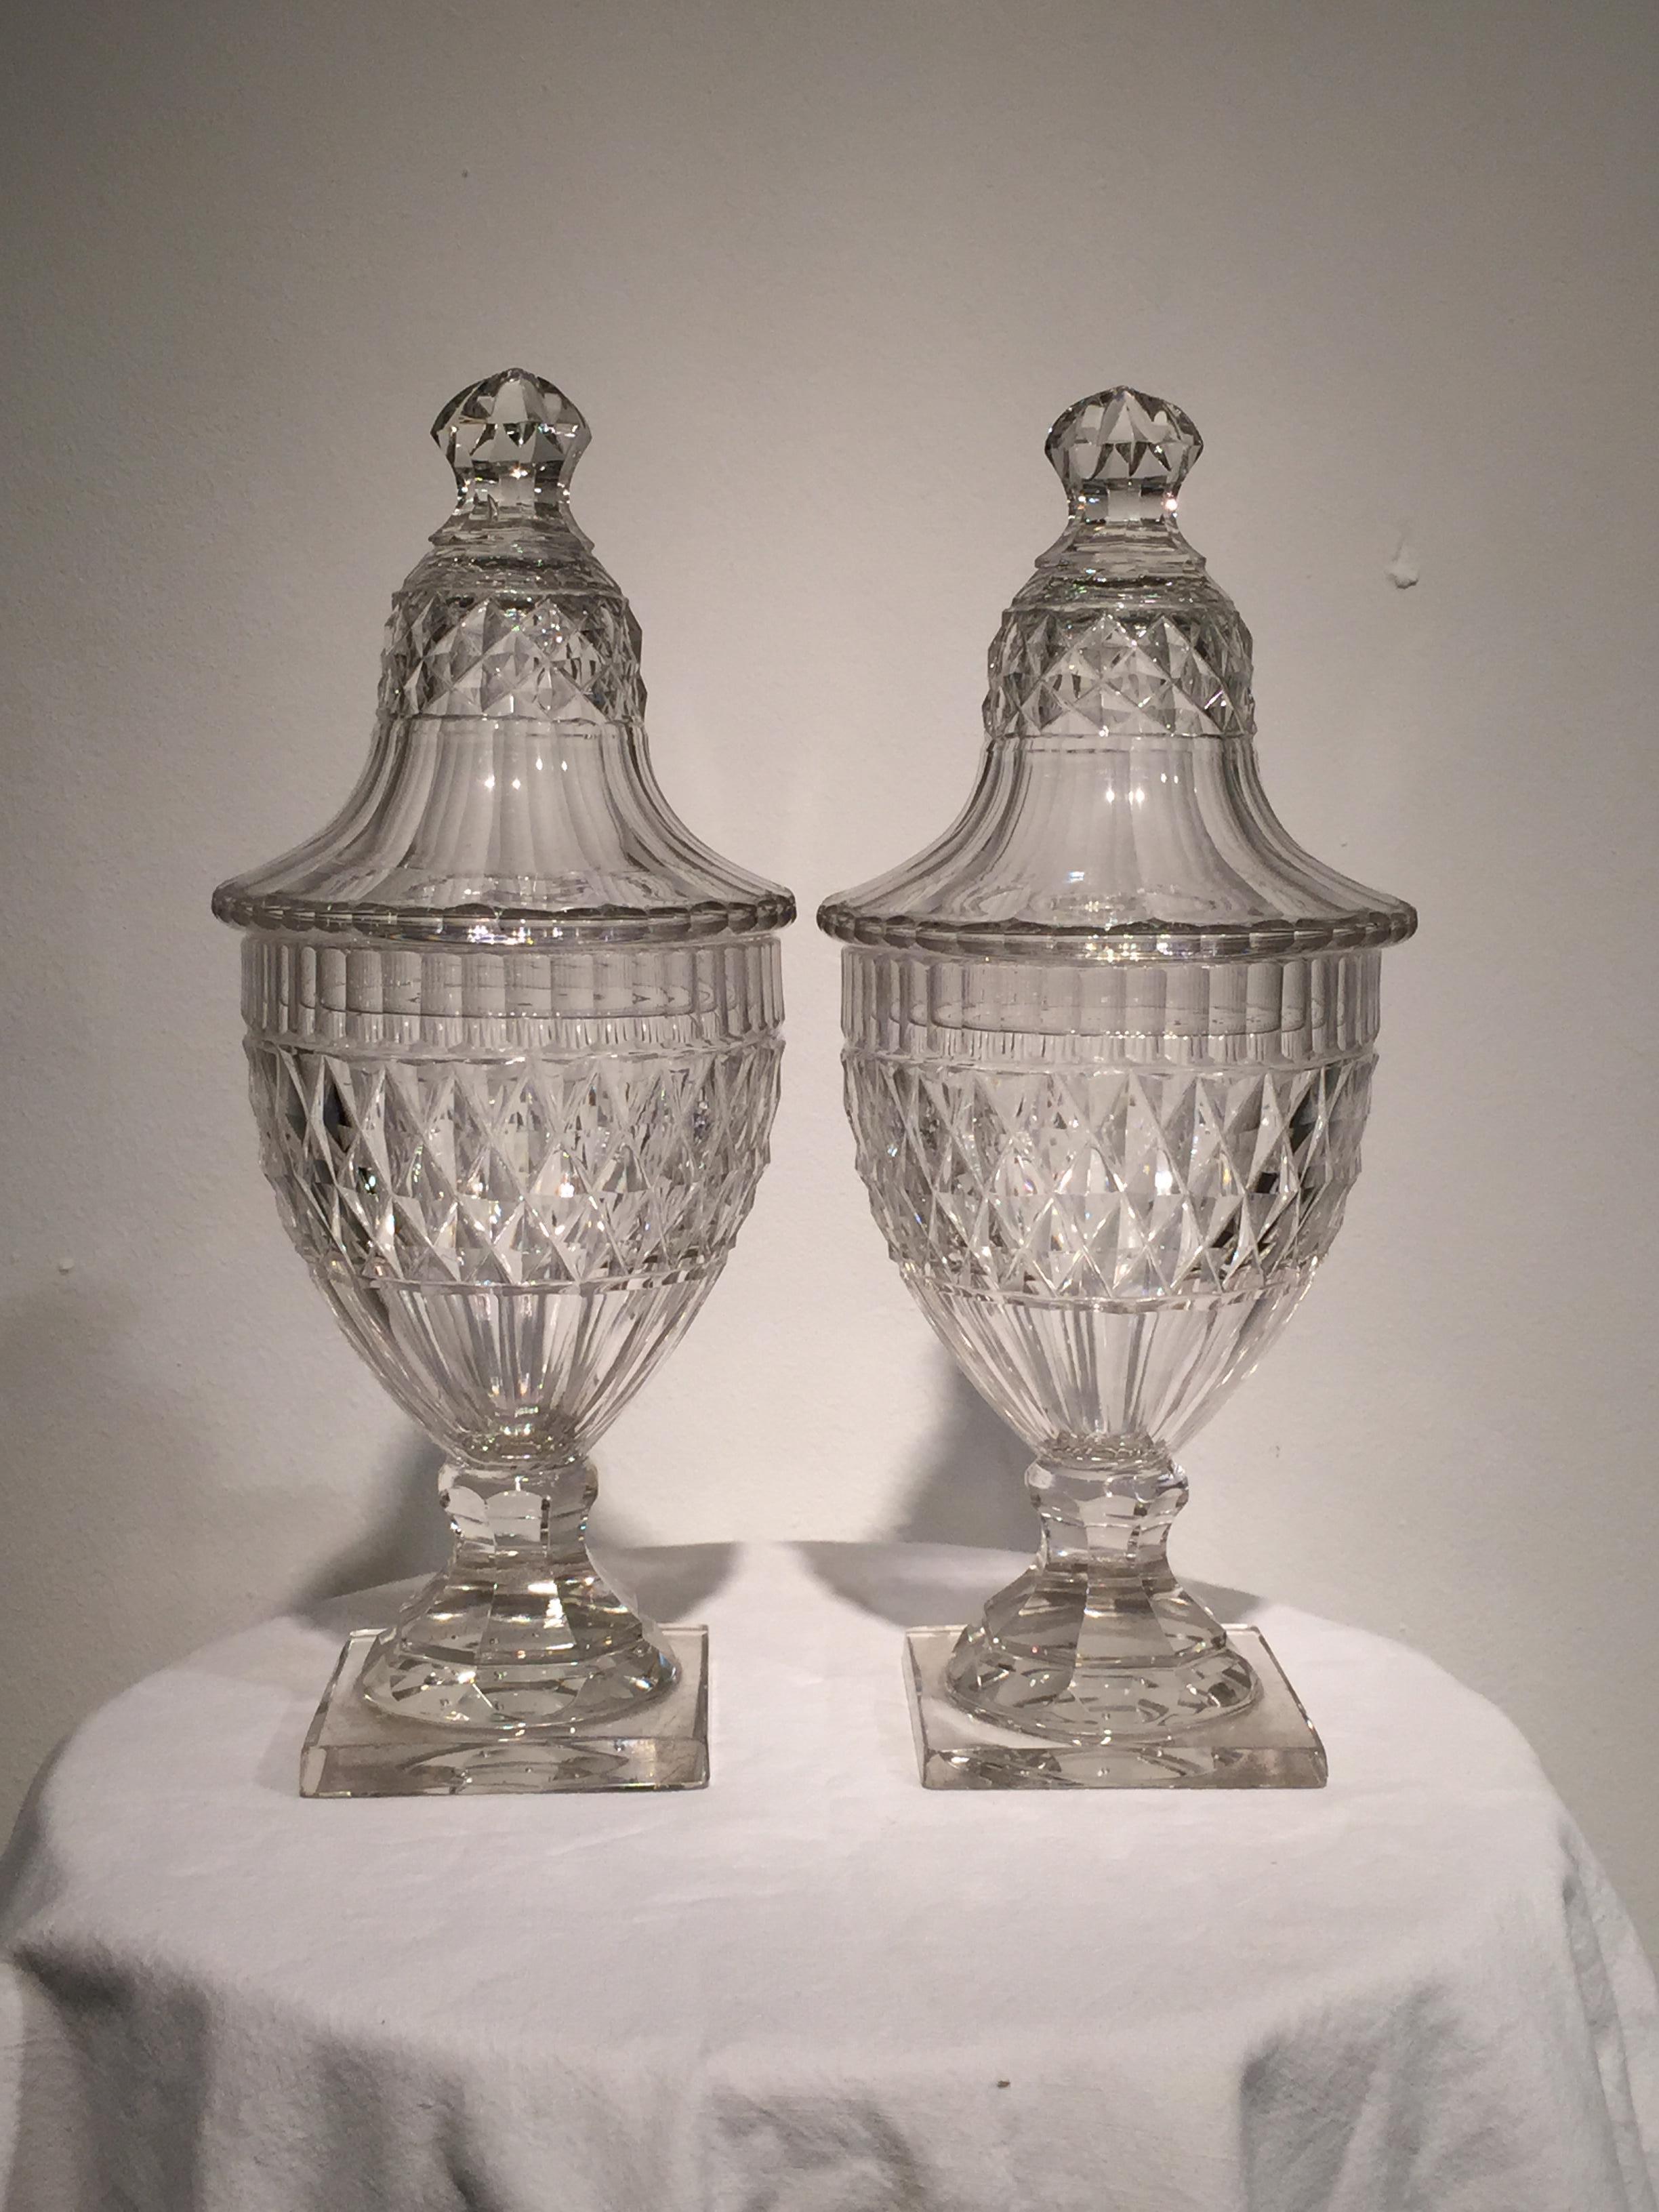 This fine and rare pair of jars and covers are of the finest quality. The lids with crown cut knop handles, hobnail and facet cutting and scalloped edge, the jar as above on square bases.
The 18th century lead crystal with fine grey hue as one